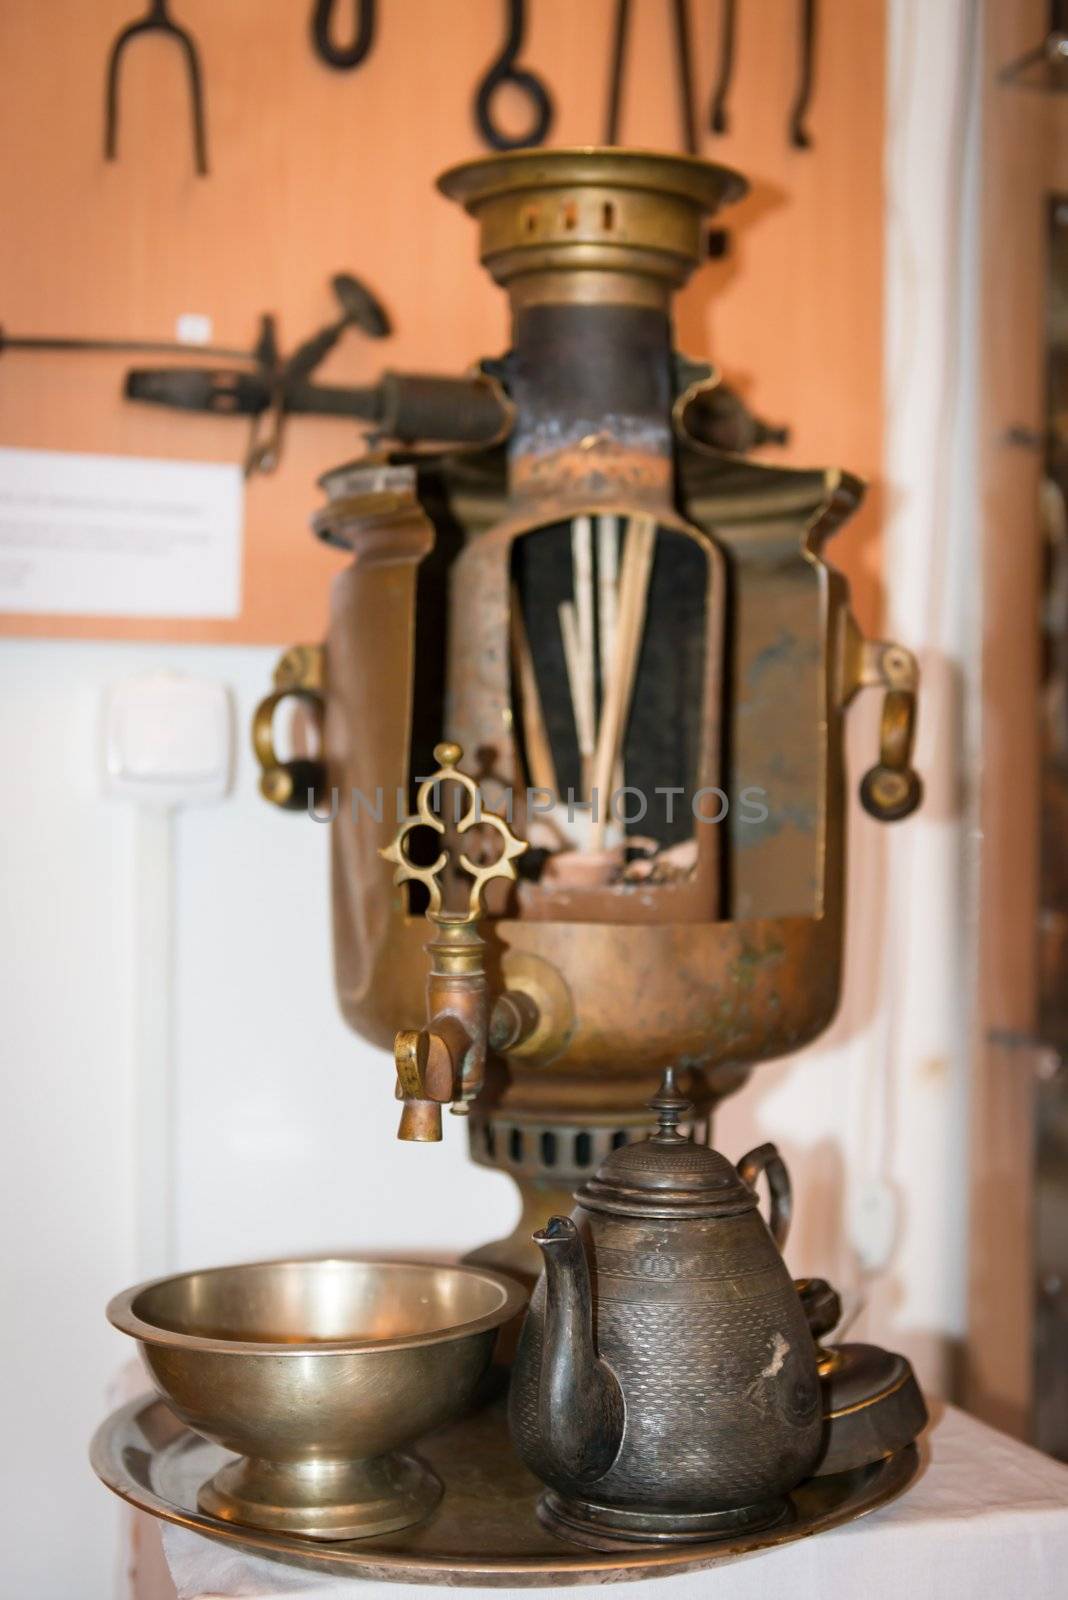 Old russian samovar with internal contents by iryna_rasko